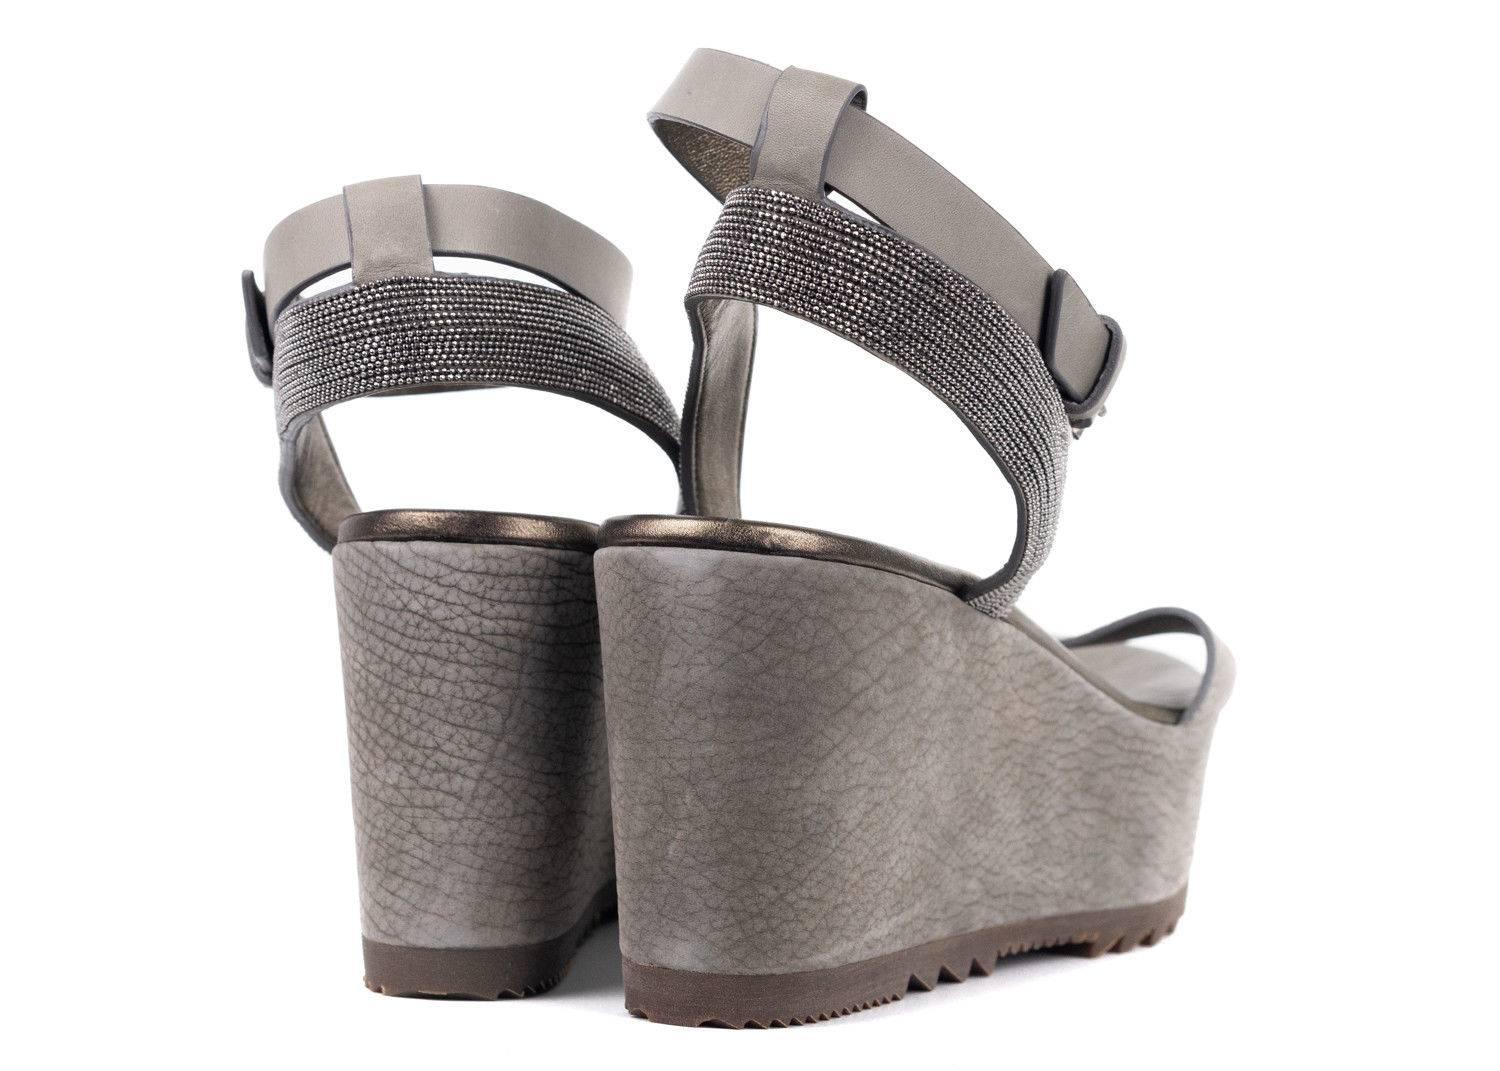 Brand New in Original Box with Dust Bag
Retails in Stores and Online $1305
Size 41 / 11 Fits True To Size

These beautiful Brunello Cucinelli Leather Platform Wedges features a Monili Ankle Strap  and Distressed Grey leather Design. These Luxurious